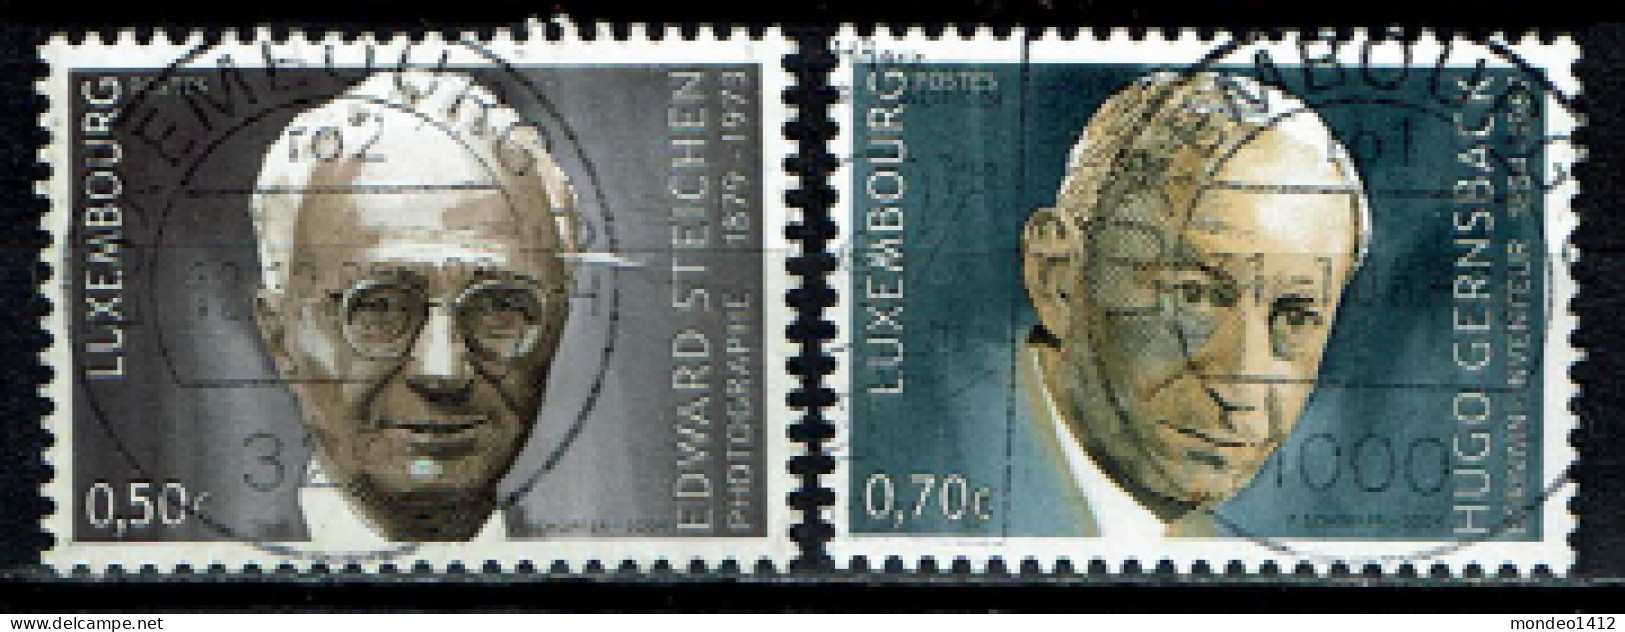 Luxembourg 2004 - YT 1582/1583 - Famous Persons, H. Steichen, H. Gernsback - Usados